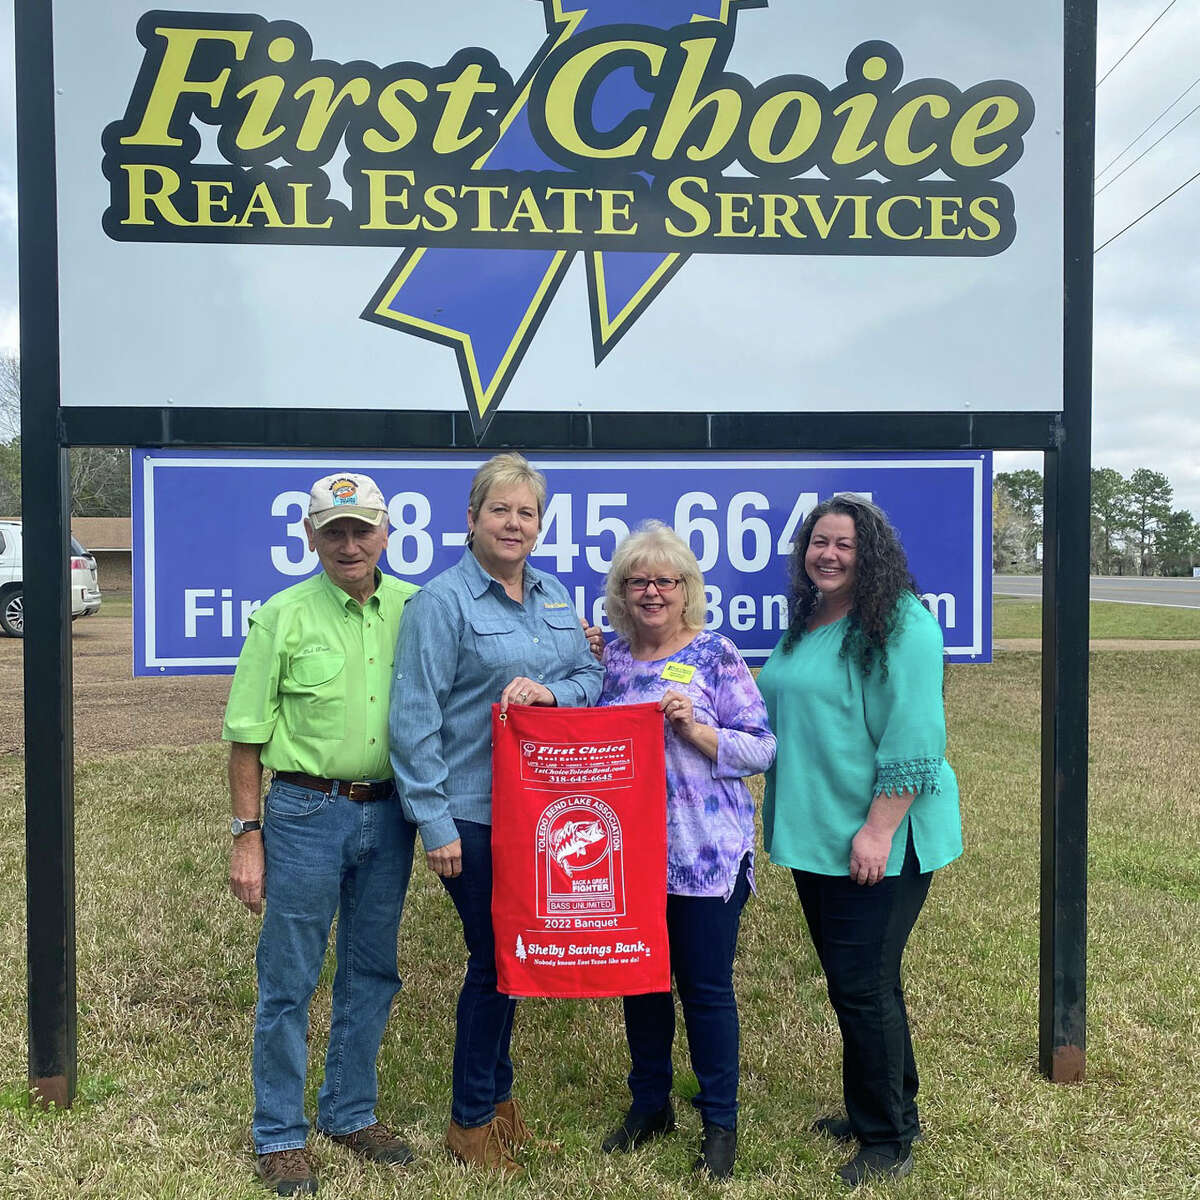 First Choice Real Estate Services is a co-sponsor of the fishing towels.  Pictured is TBLA BU Coordinator Ted Dove with Owner/Broker Dayna Yeldell, Teresa Moreau and Karen Harrison.